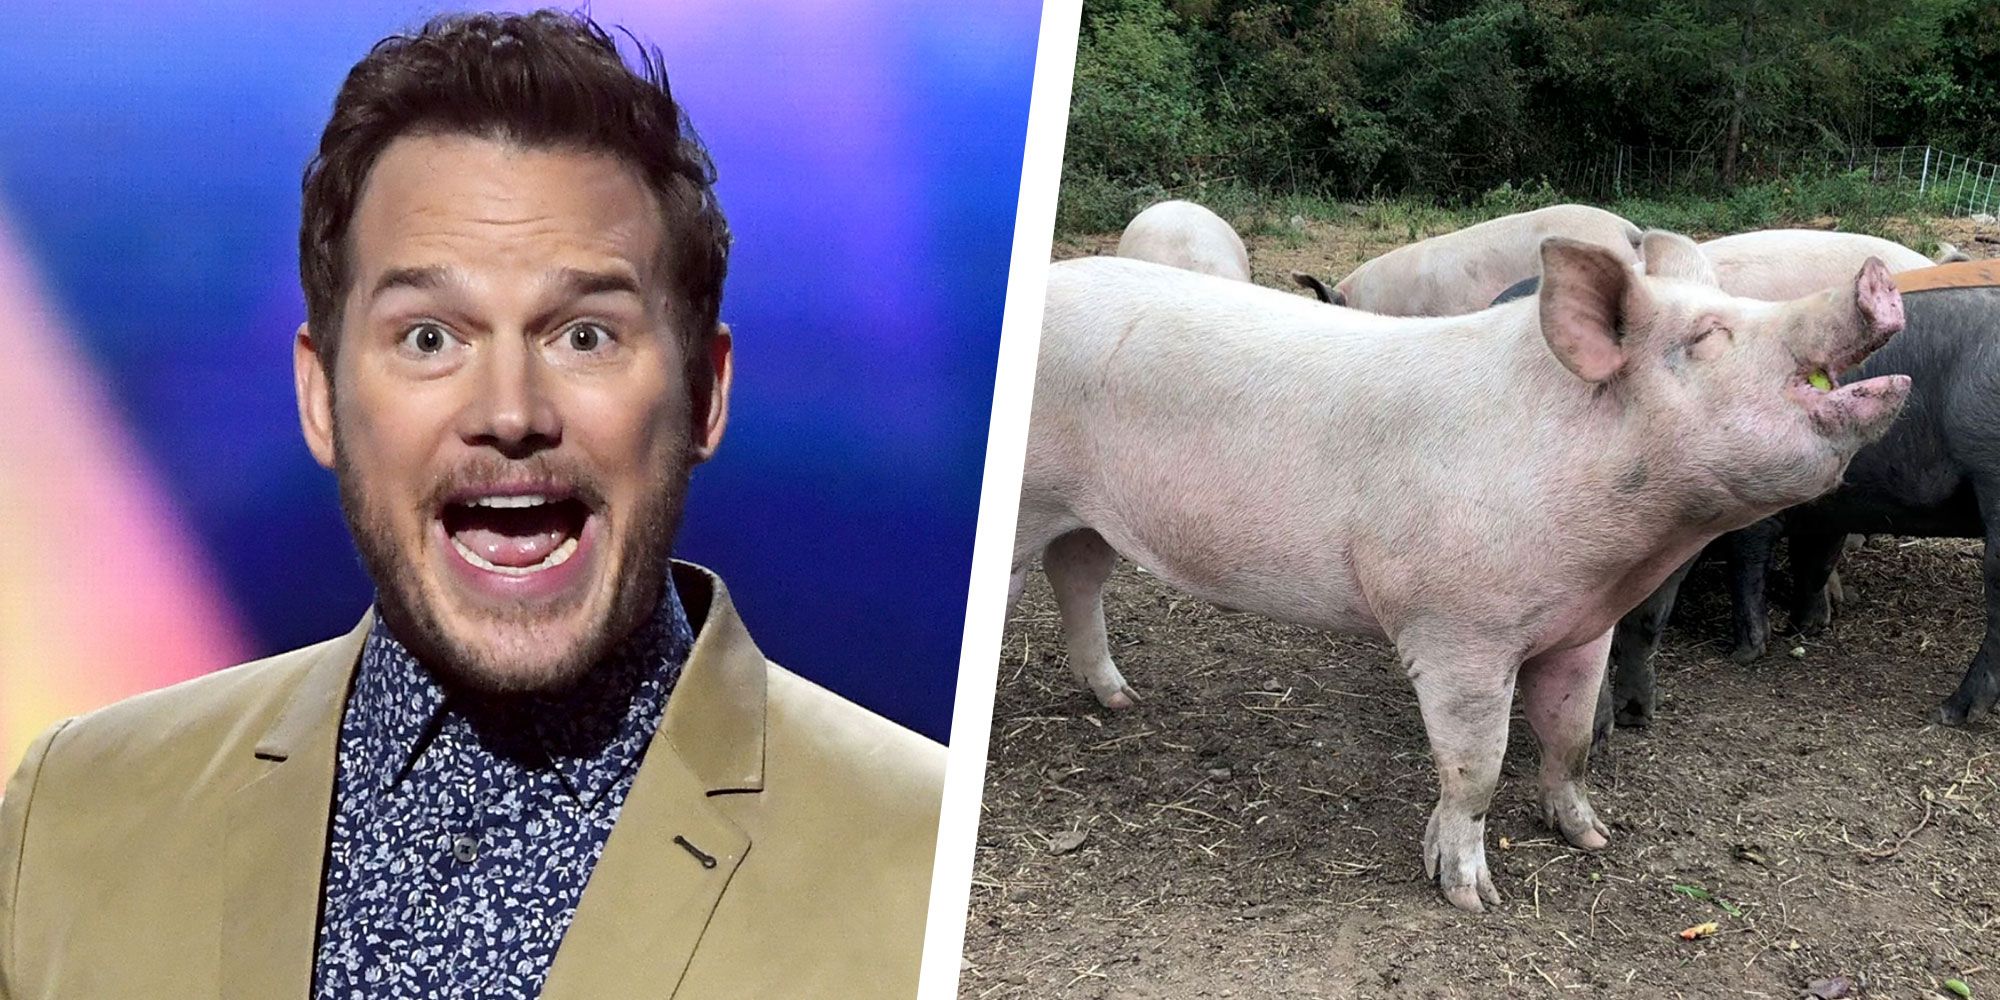 Chris Pratt Wrote Erotica About a Blissful Pig on Instagram